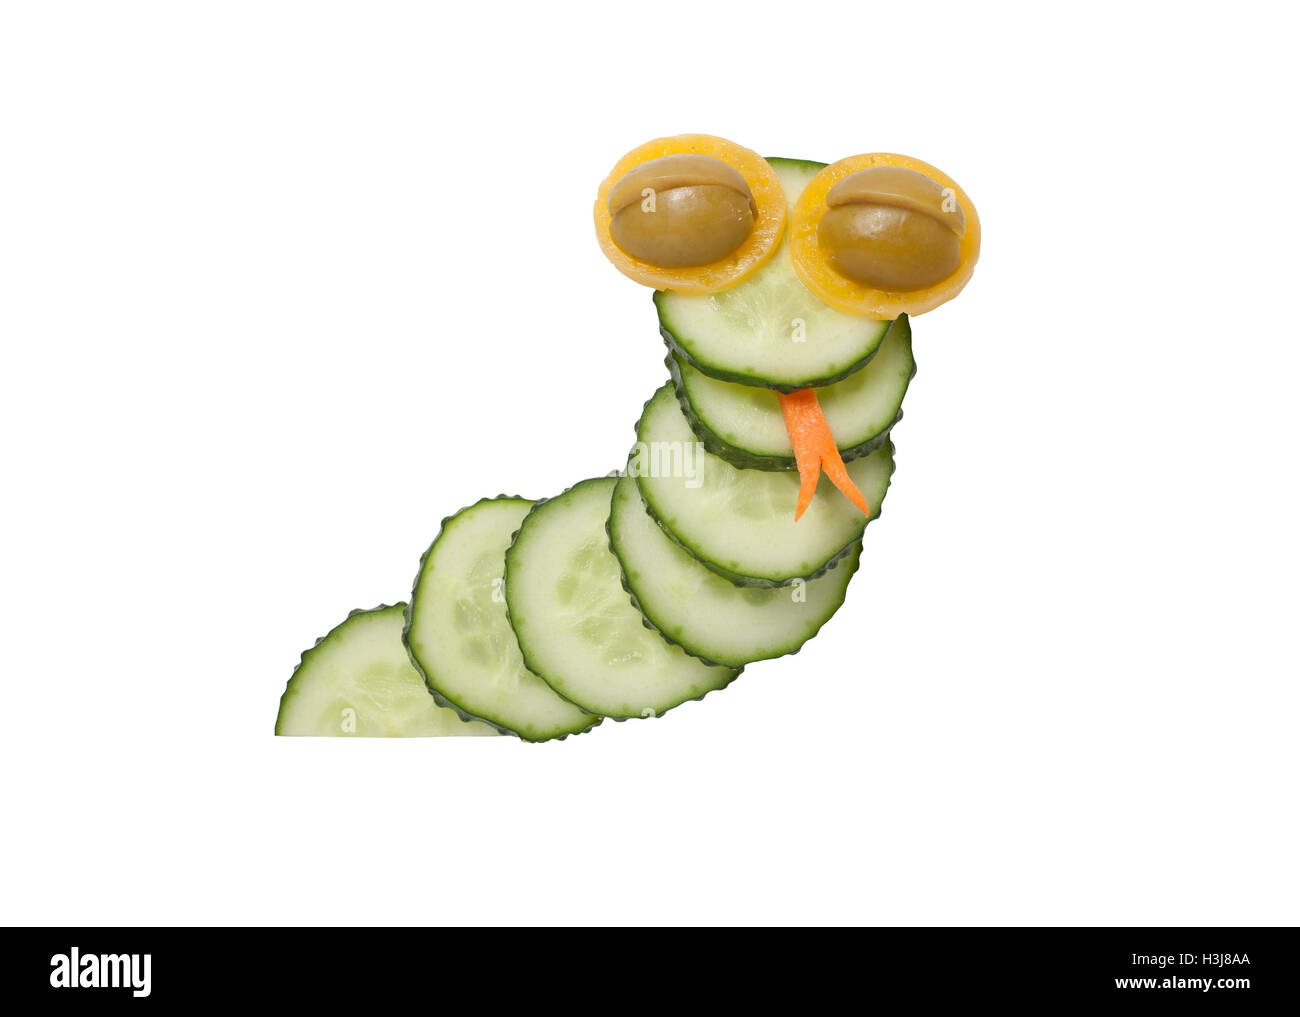 Funny snake made of cucumber on isolated background Stock Photo